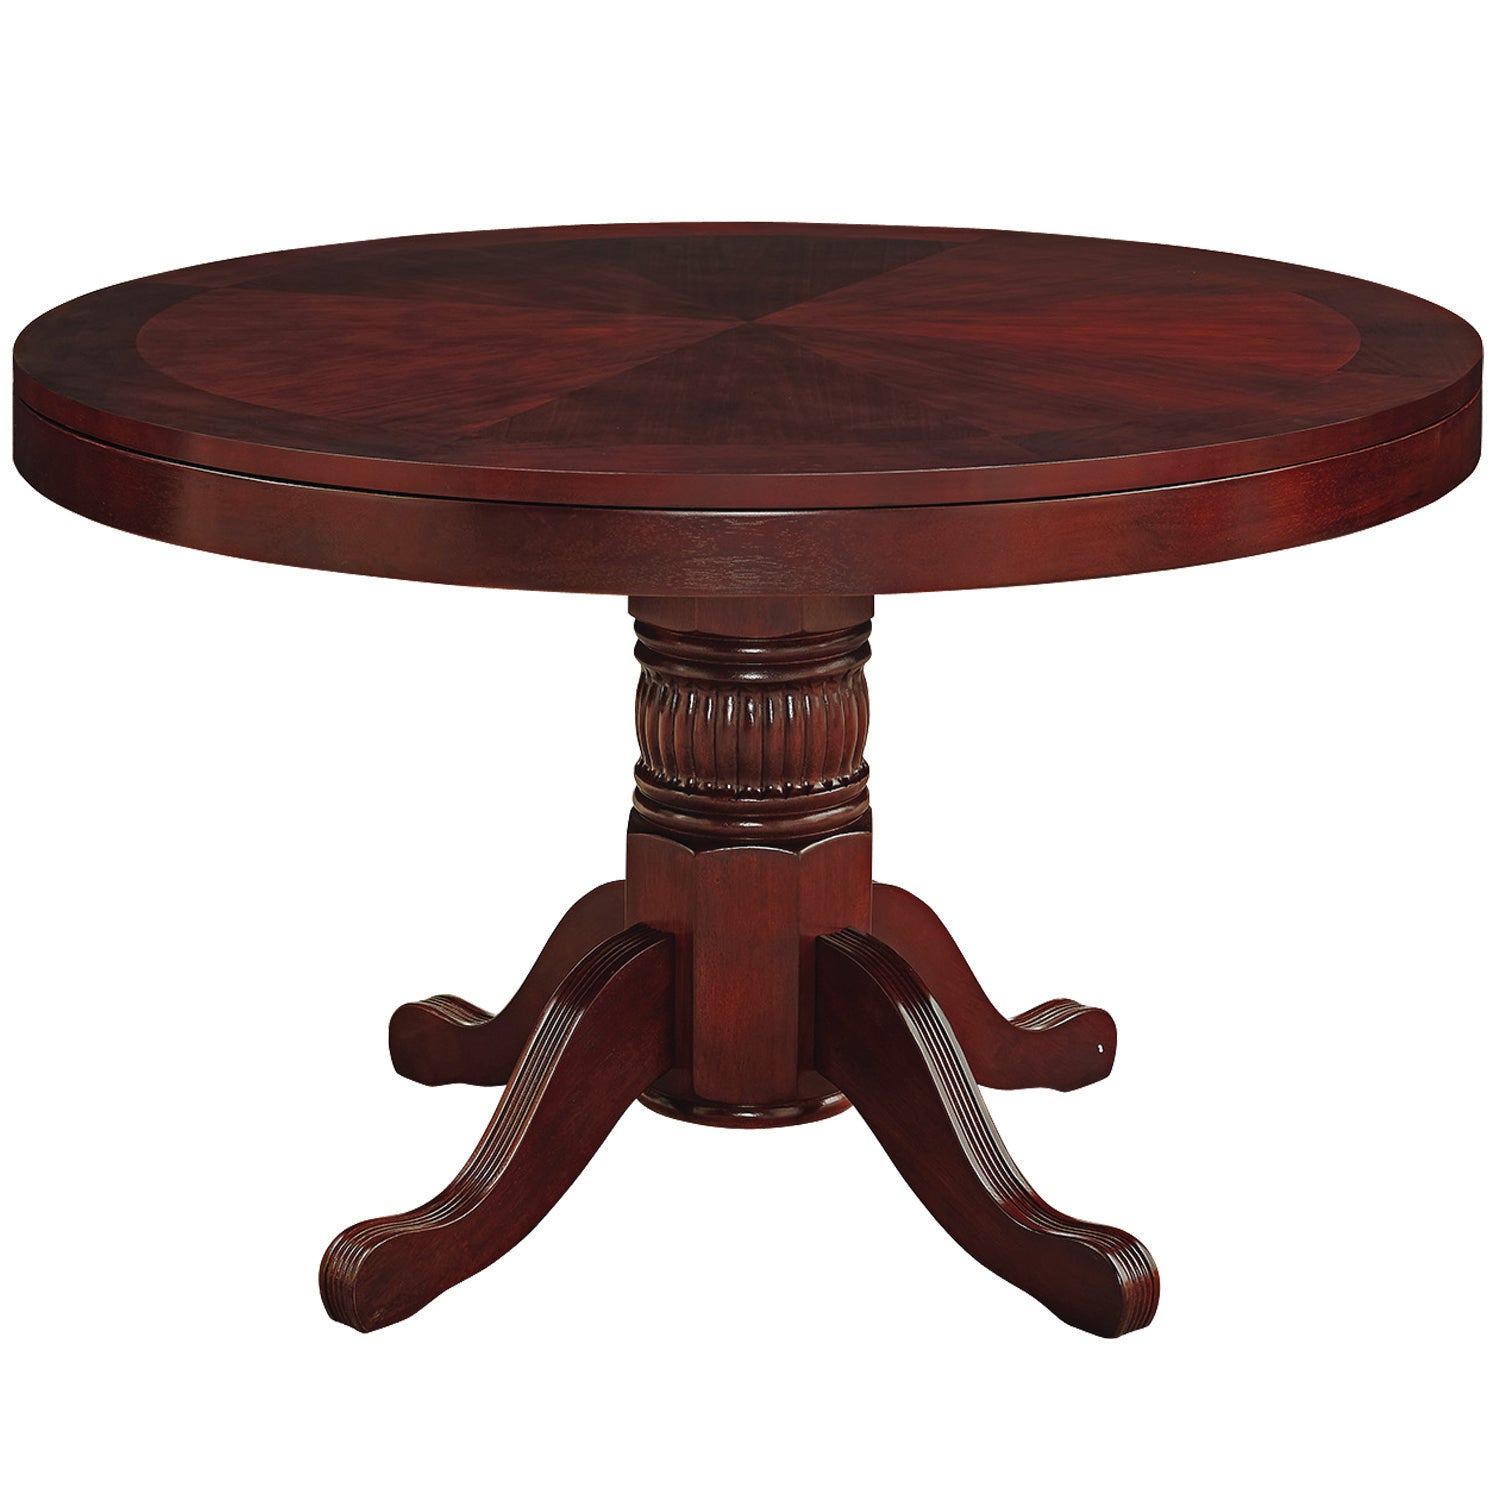 Round convertible game table with dining top in an English tudor finish.